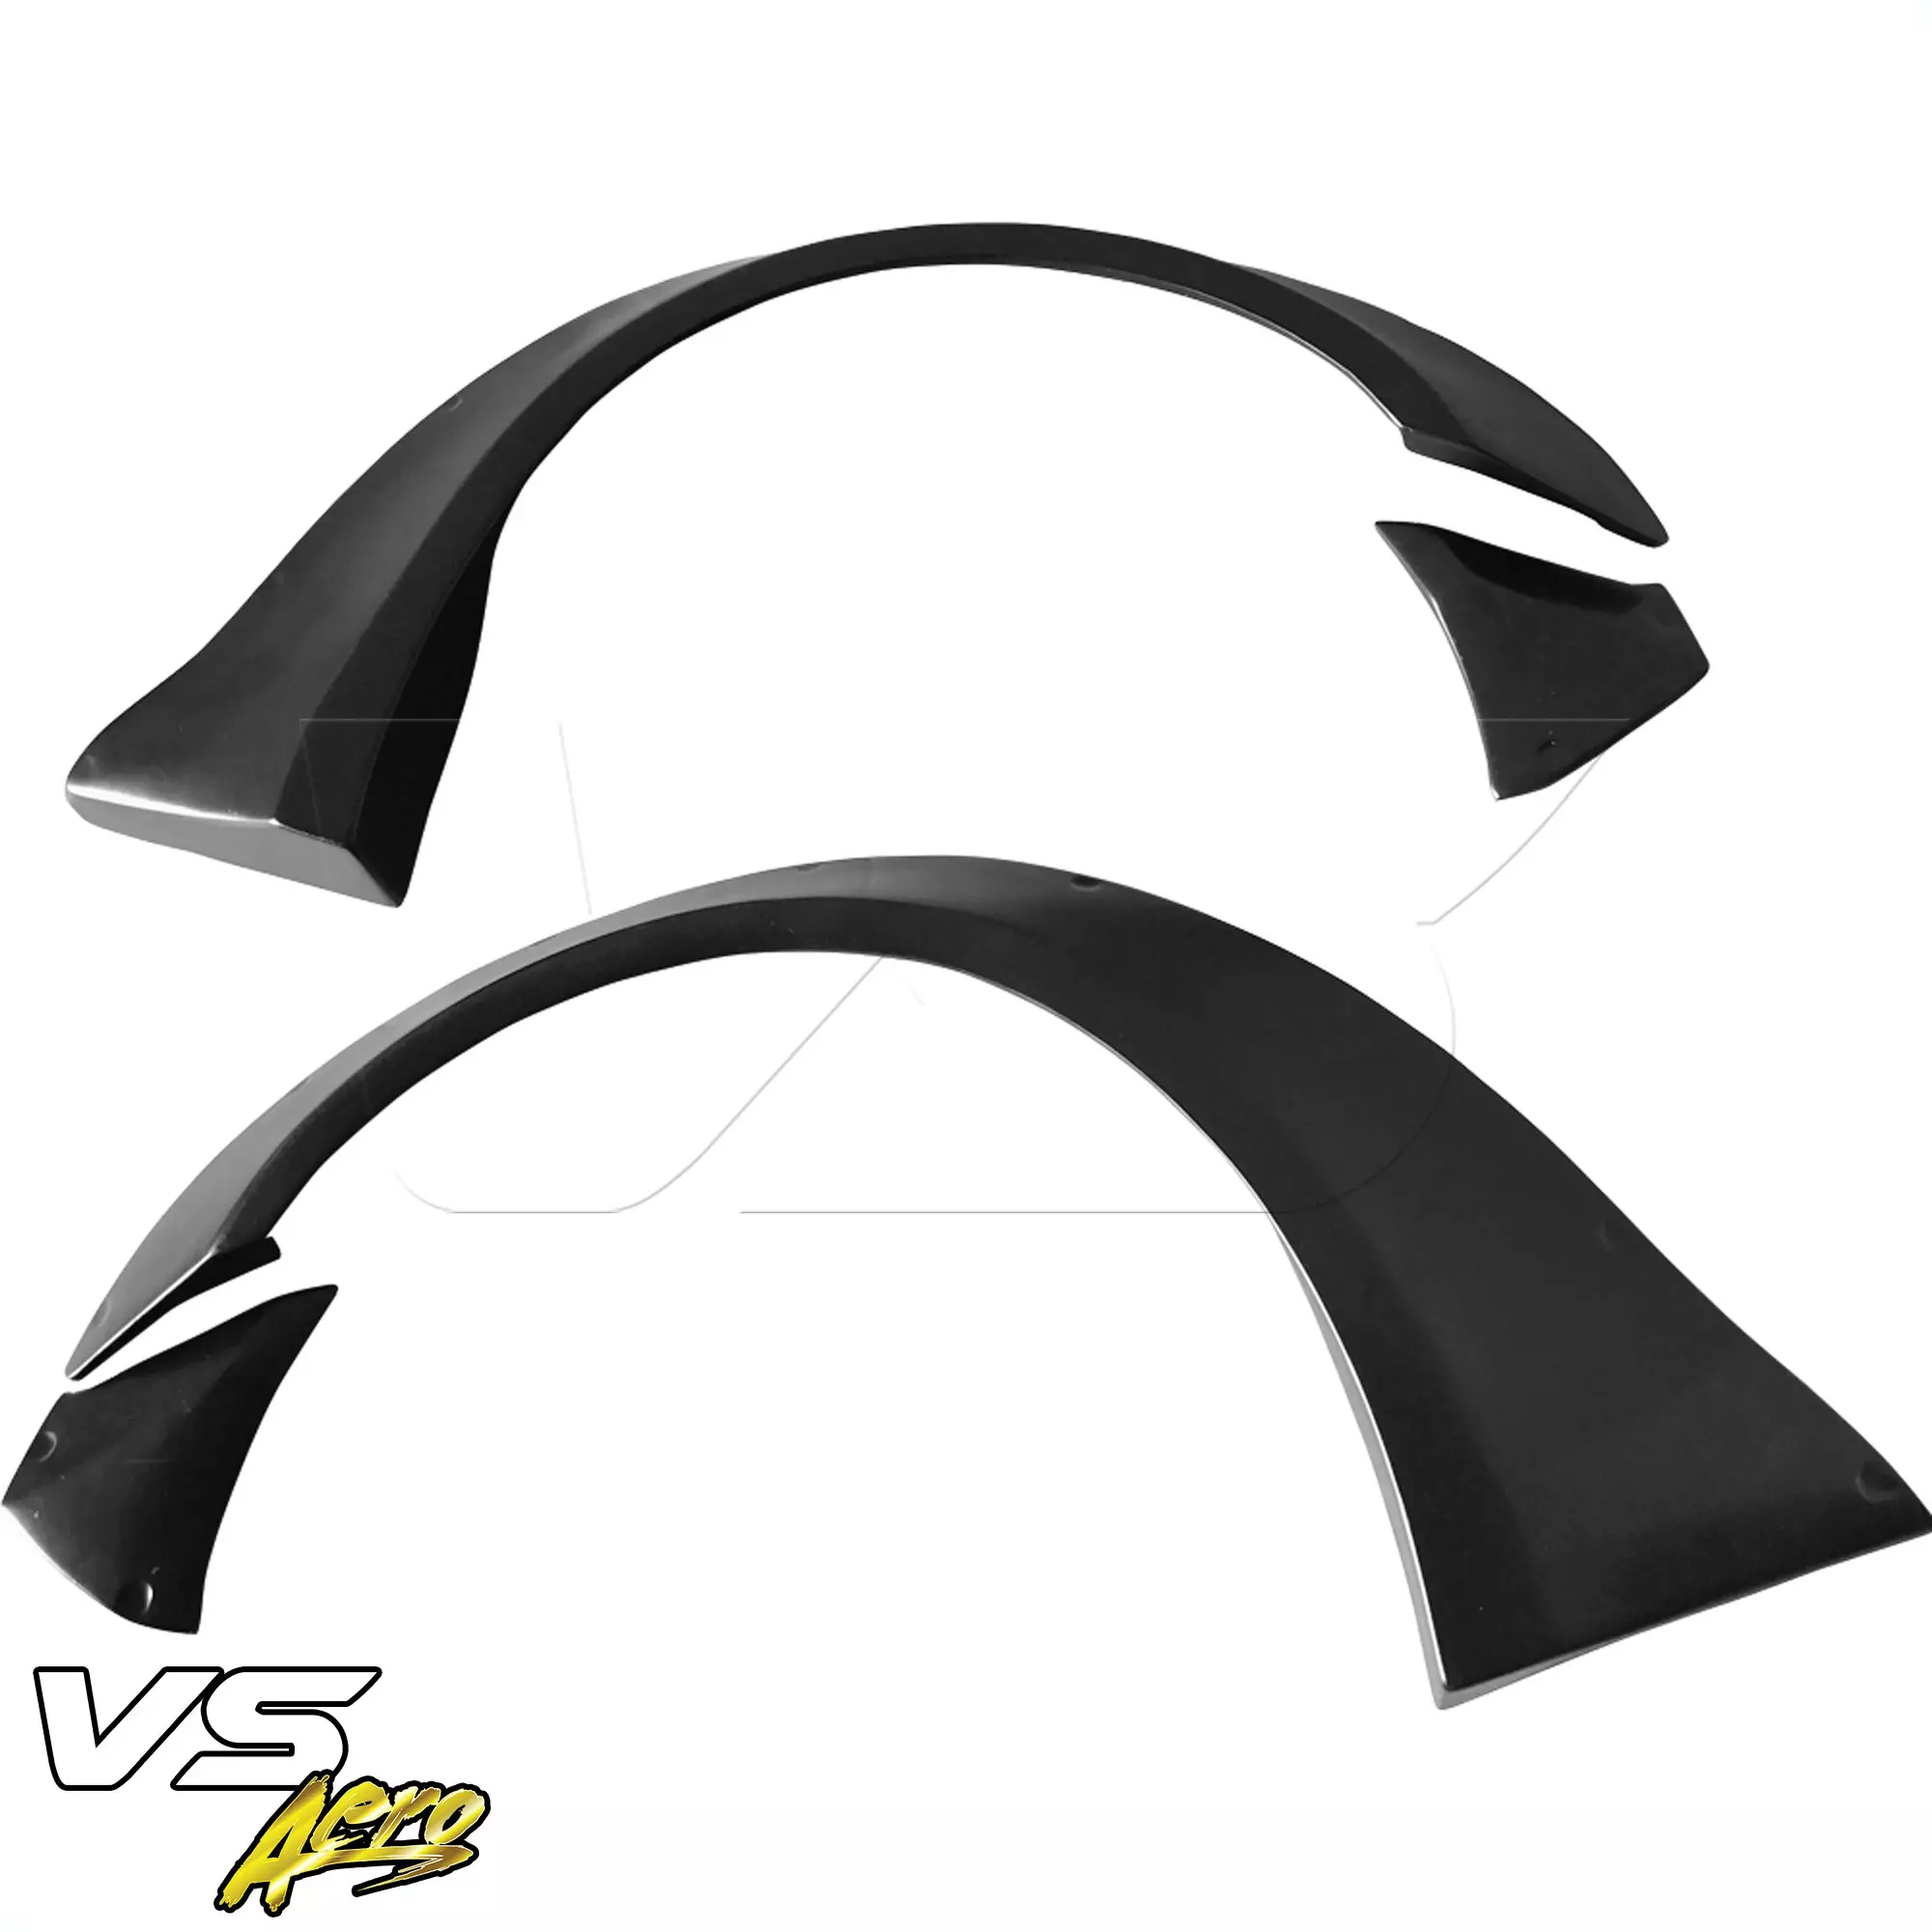 VSaero FRP LBPE Wide Body Fender Flares (front) 4pc > Infiniti G37 Coupe 2008-2015 > 2dr Coupe - Image 14